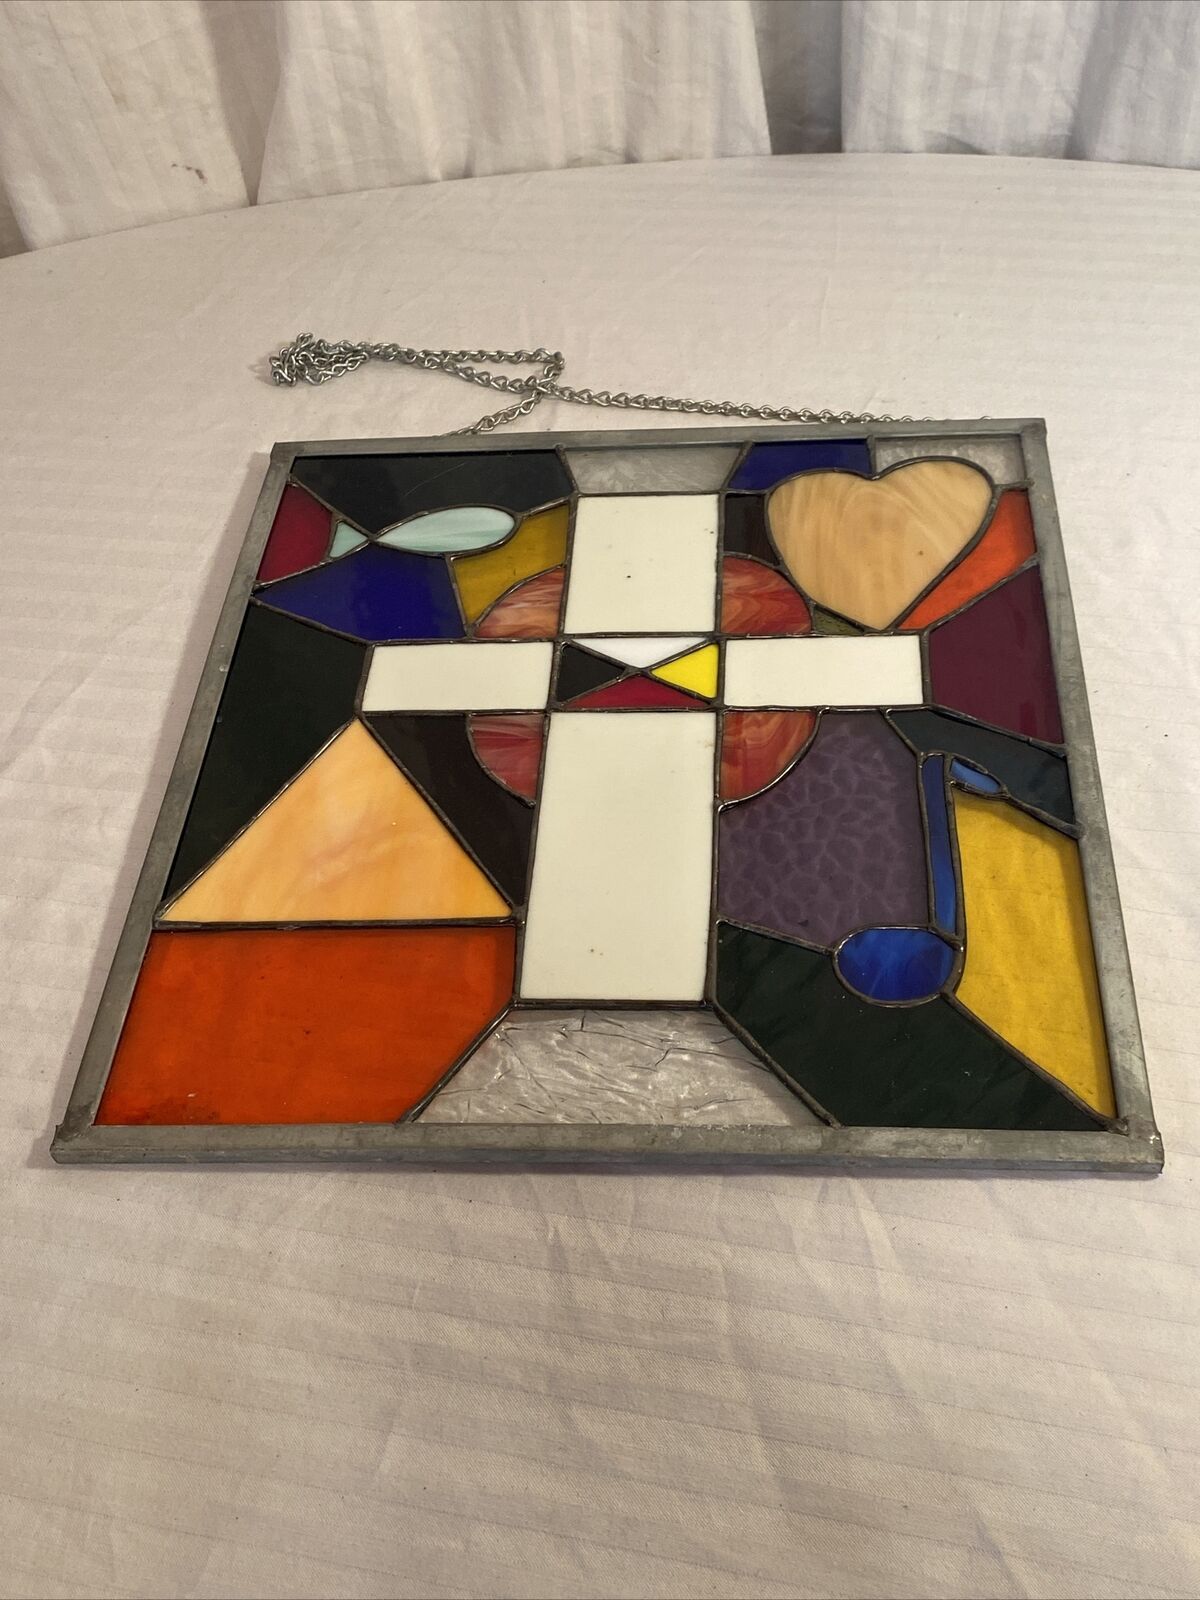 LEADED STAINED GLASS WINDOW Hanger 在庫処分 お気に入り Design Simple Cross Abstract